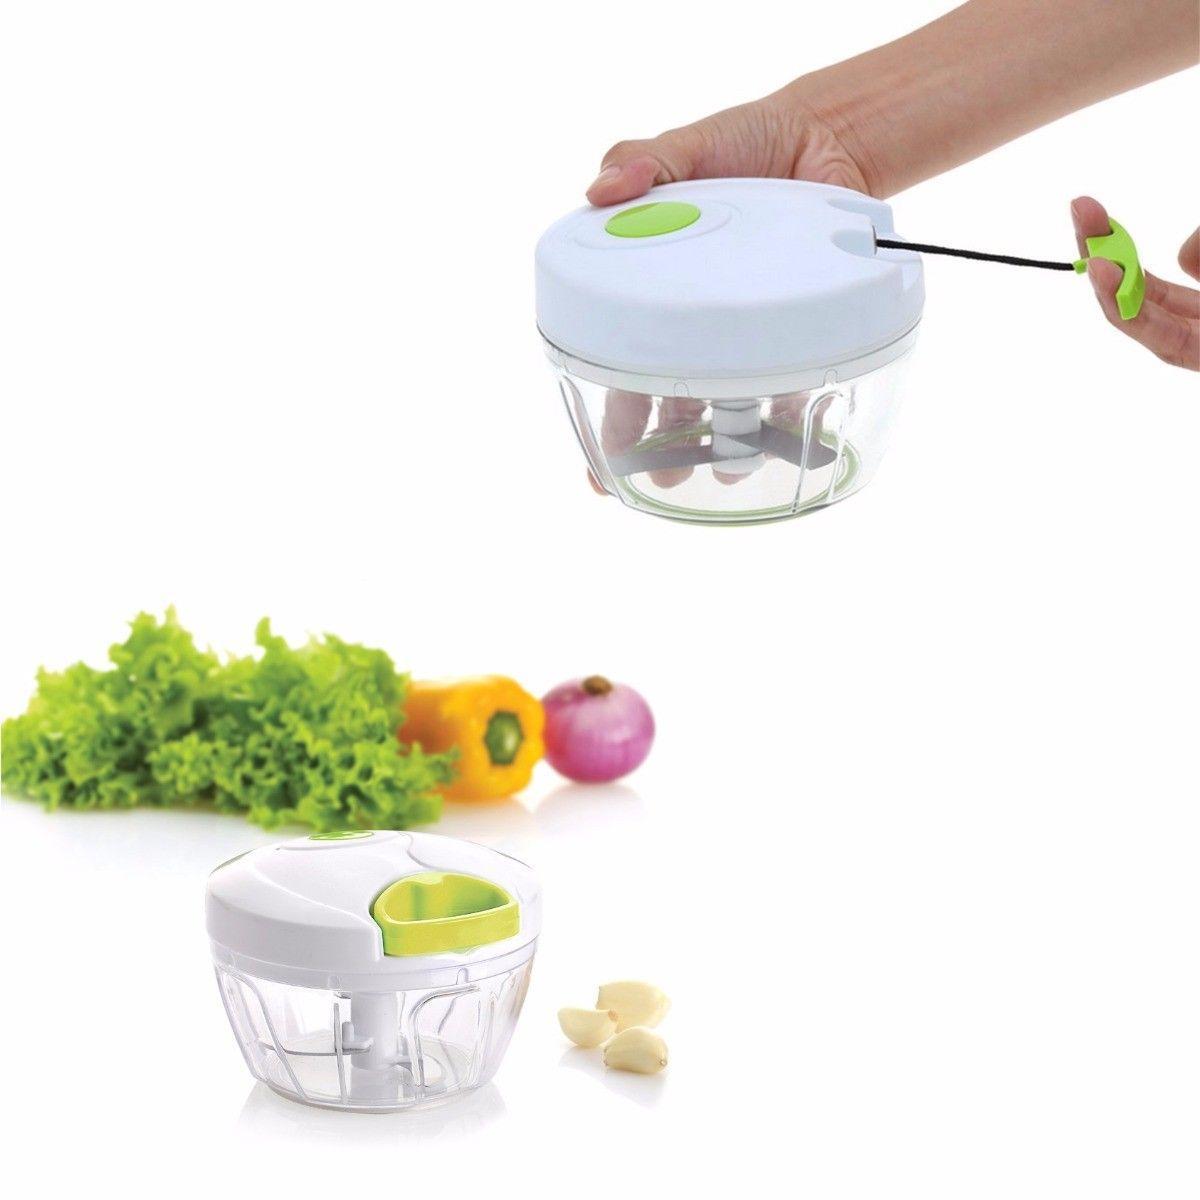 New Nicer Dicer Plus Speedy Chopper Just Pull Trigger For Perfect Salad  4001 (Parcel Rate)